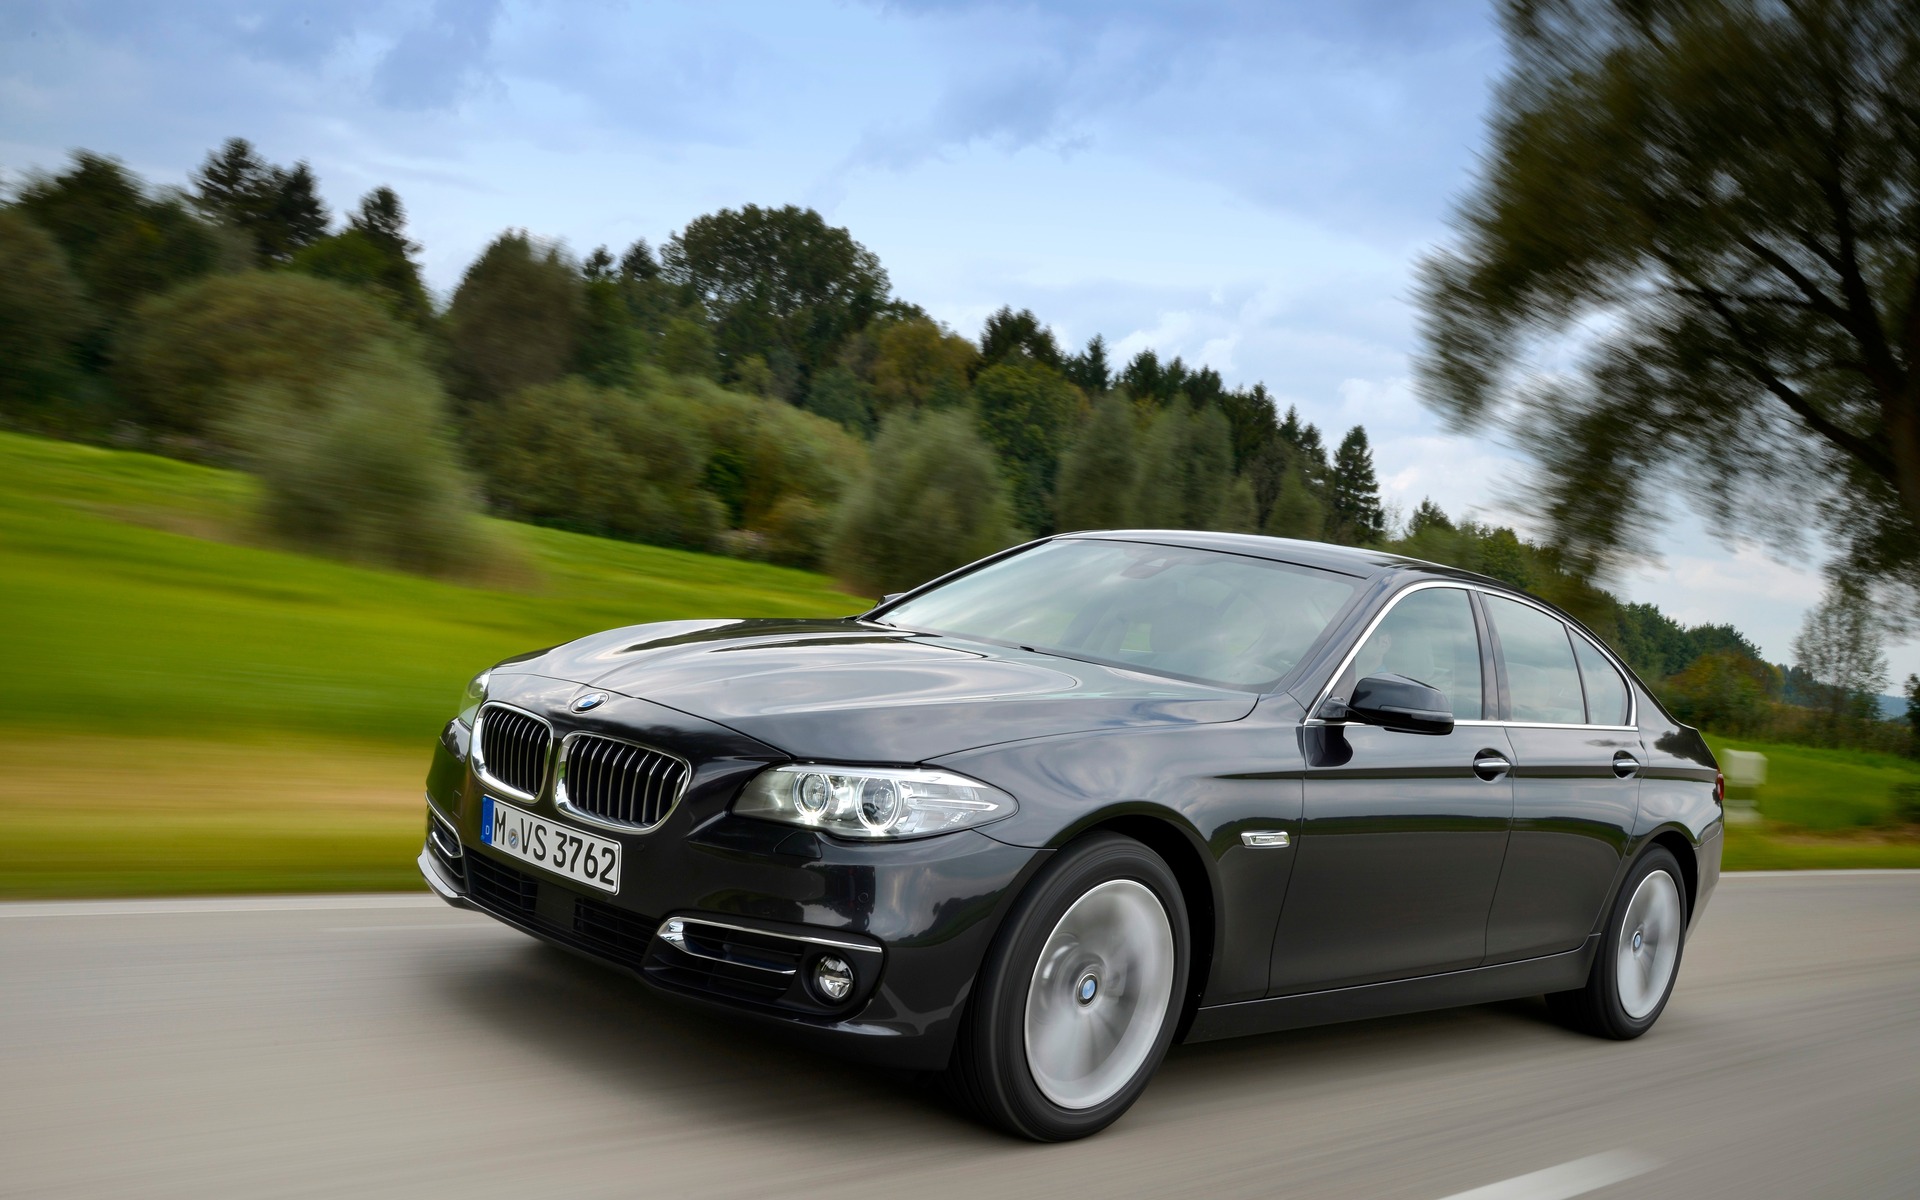 16 Bmw 5 Series News Reviews Picture Galleries And Videos The Car Guide